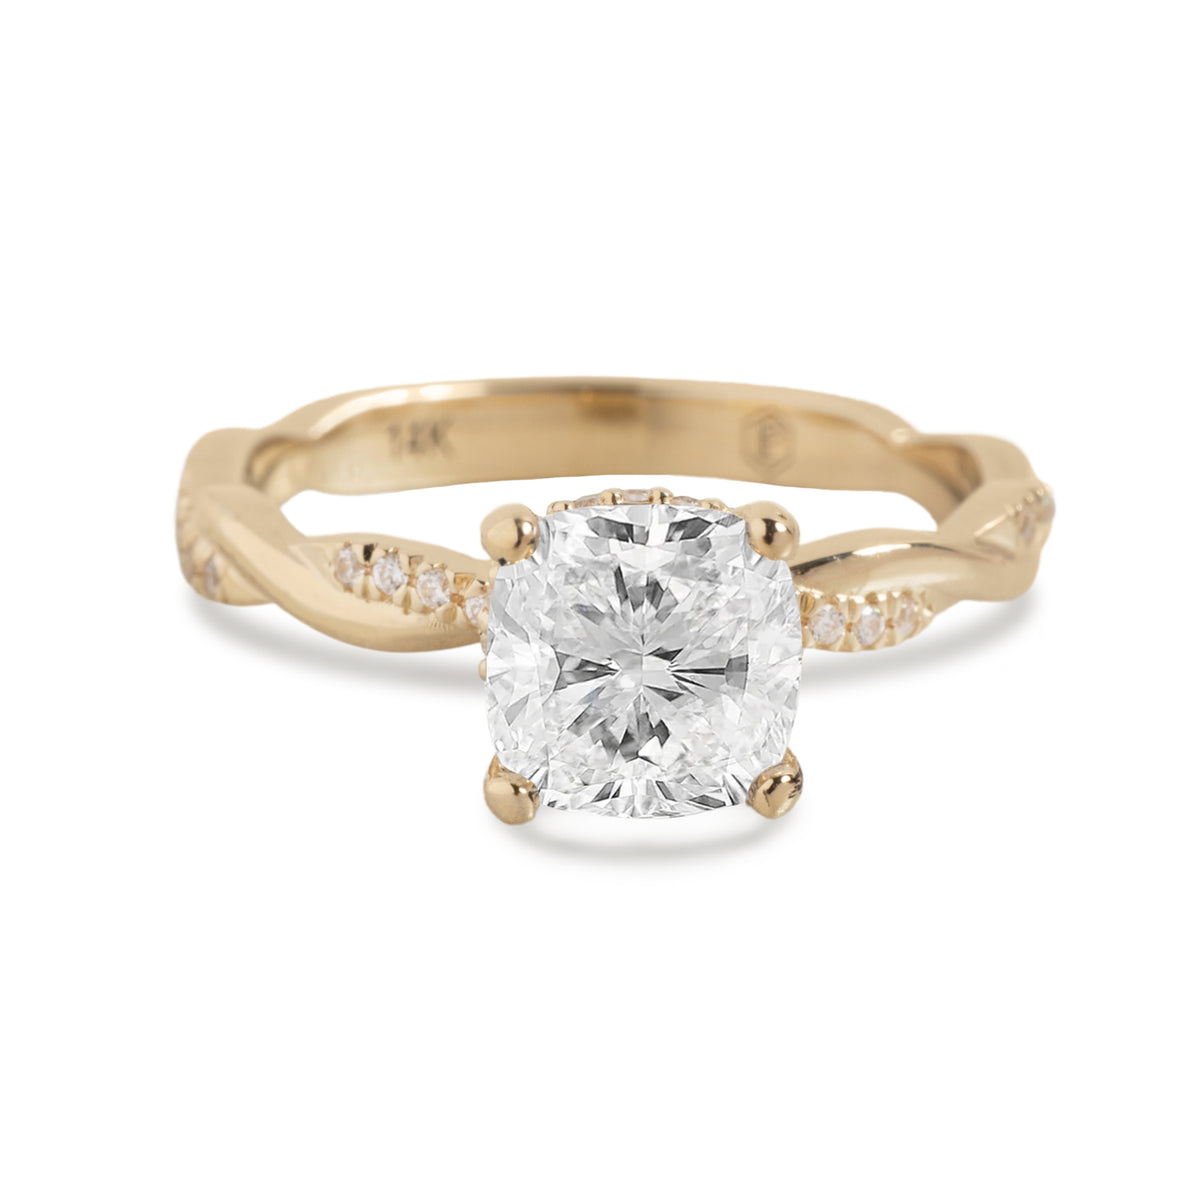 14k yellow, white, or rose gold semi custom engagement ring solitaire diamond on twisted band with diamonds